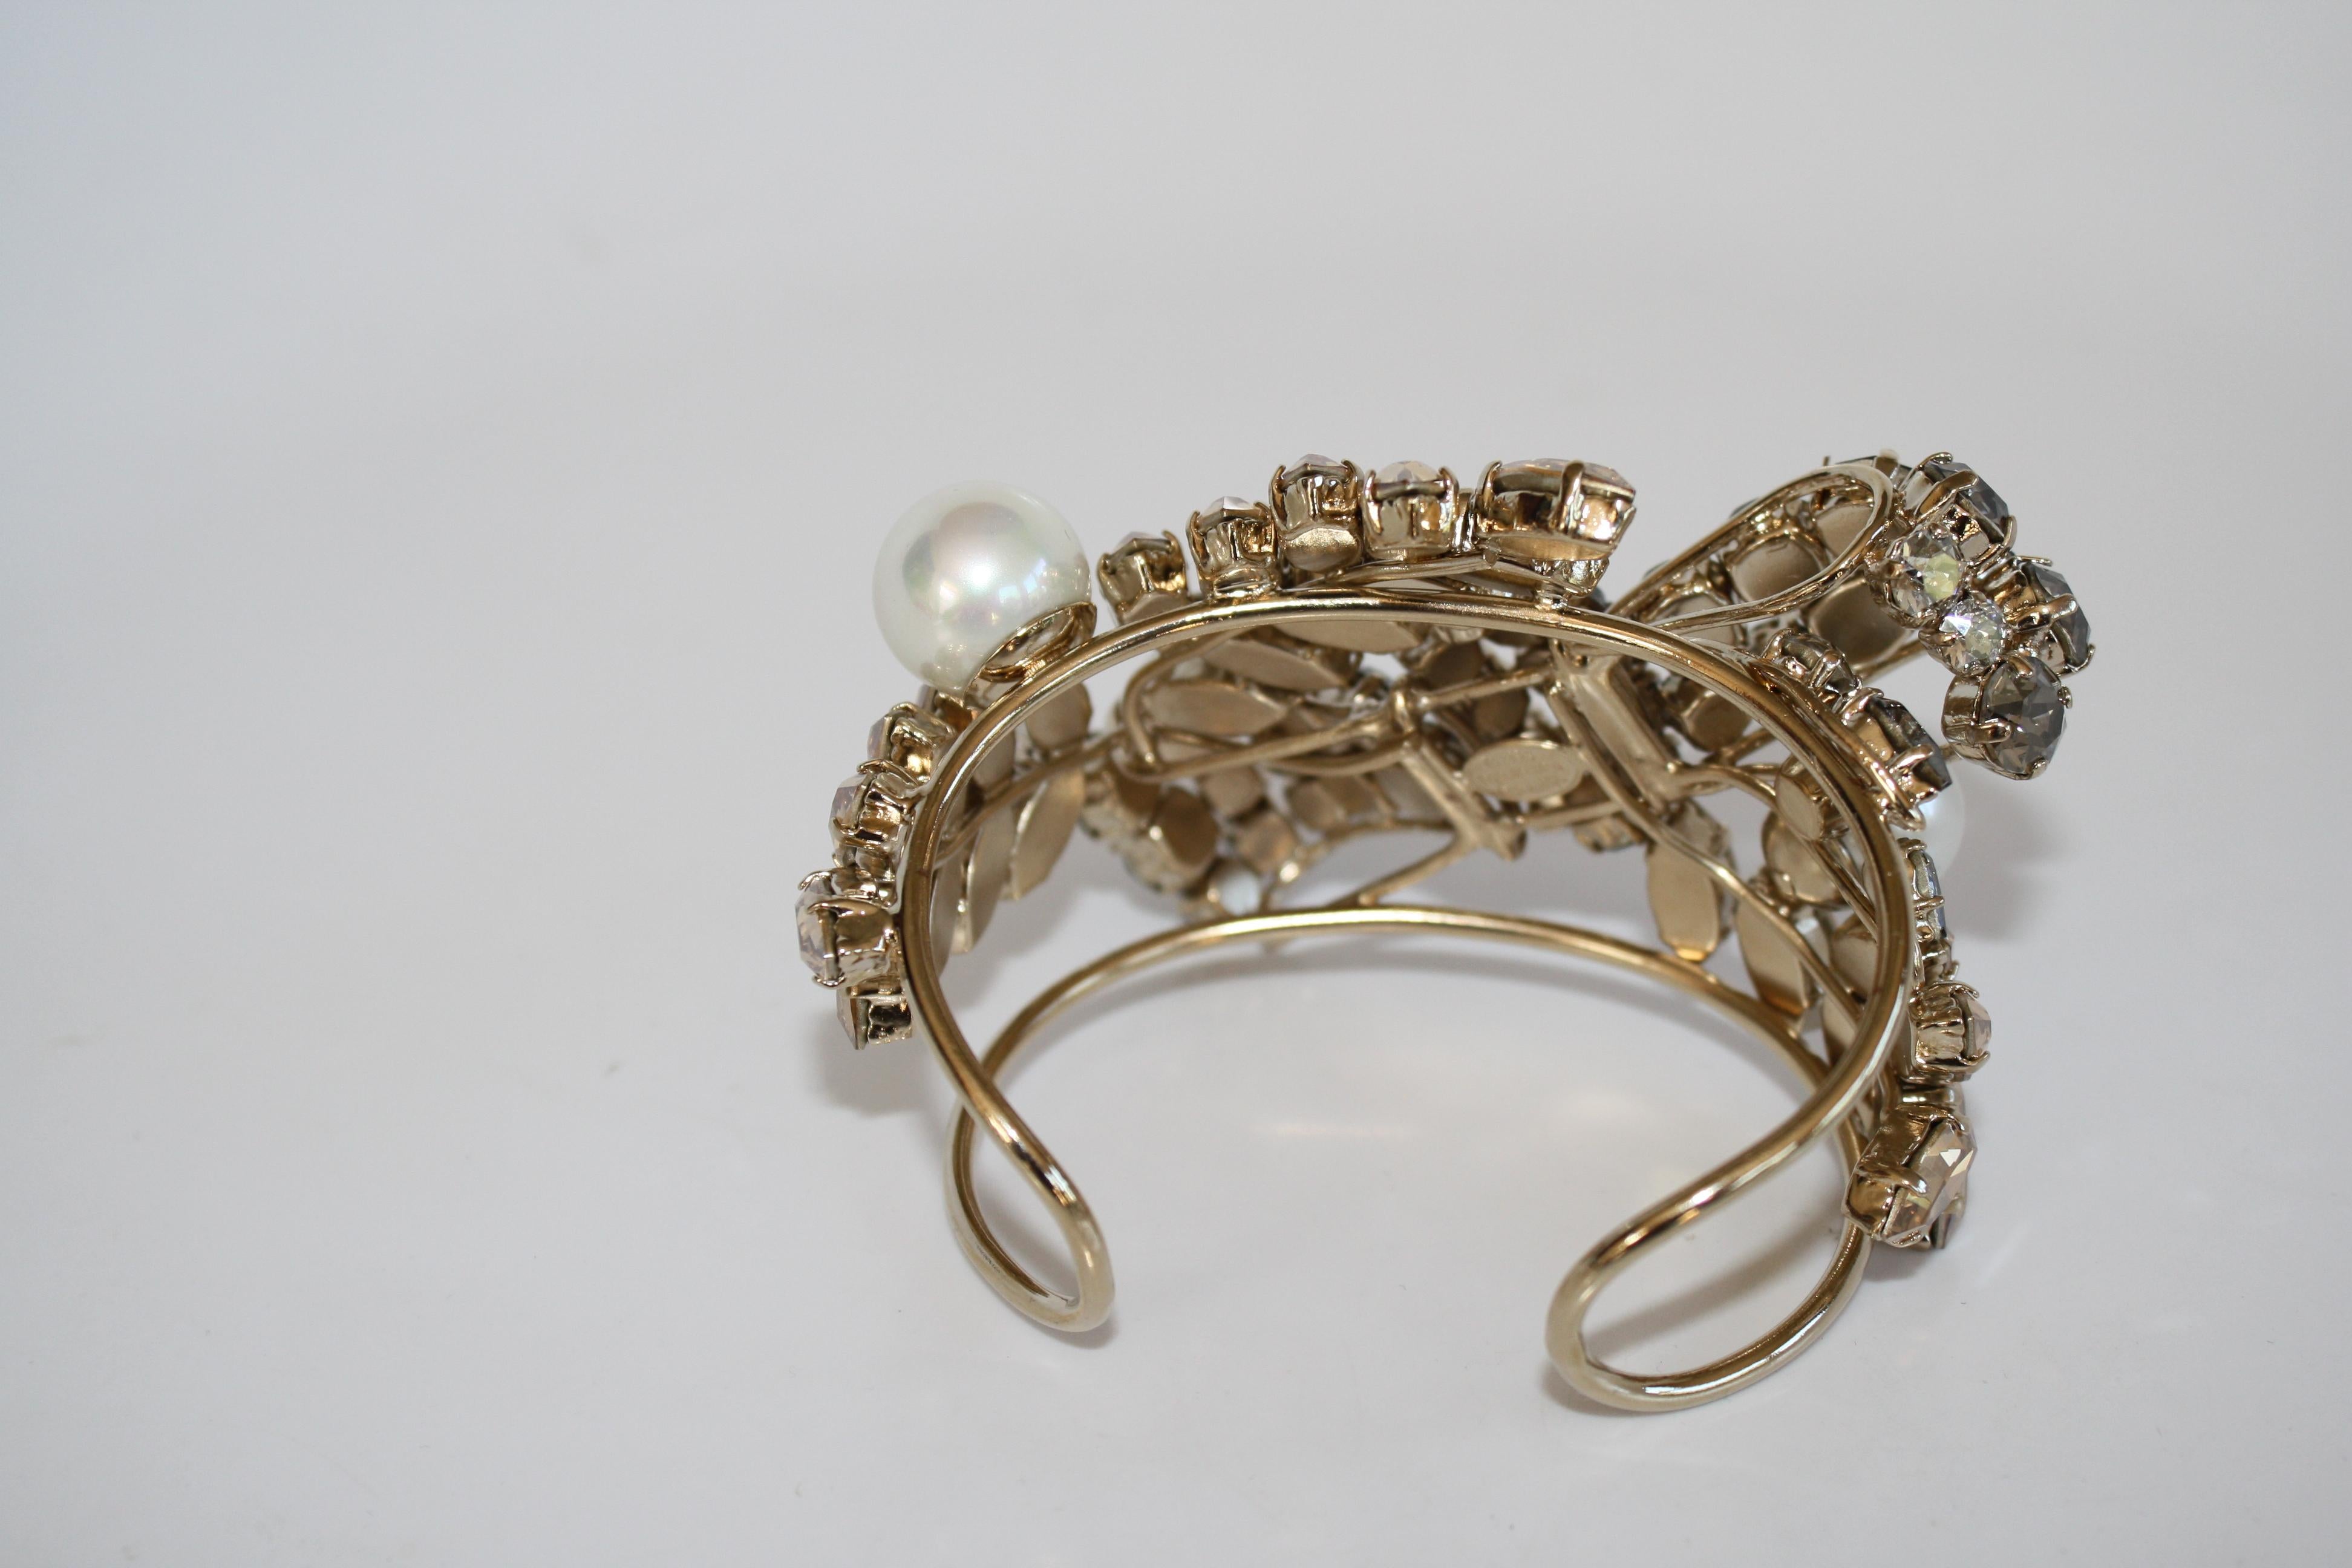 Swarovski Crystal bow and leaf motif cuff bracelet with glass pearls from Philippe Ferrandis. Cuff is malleable and can adjust to wrists both large and small.  